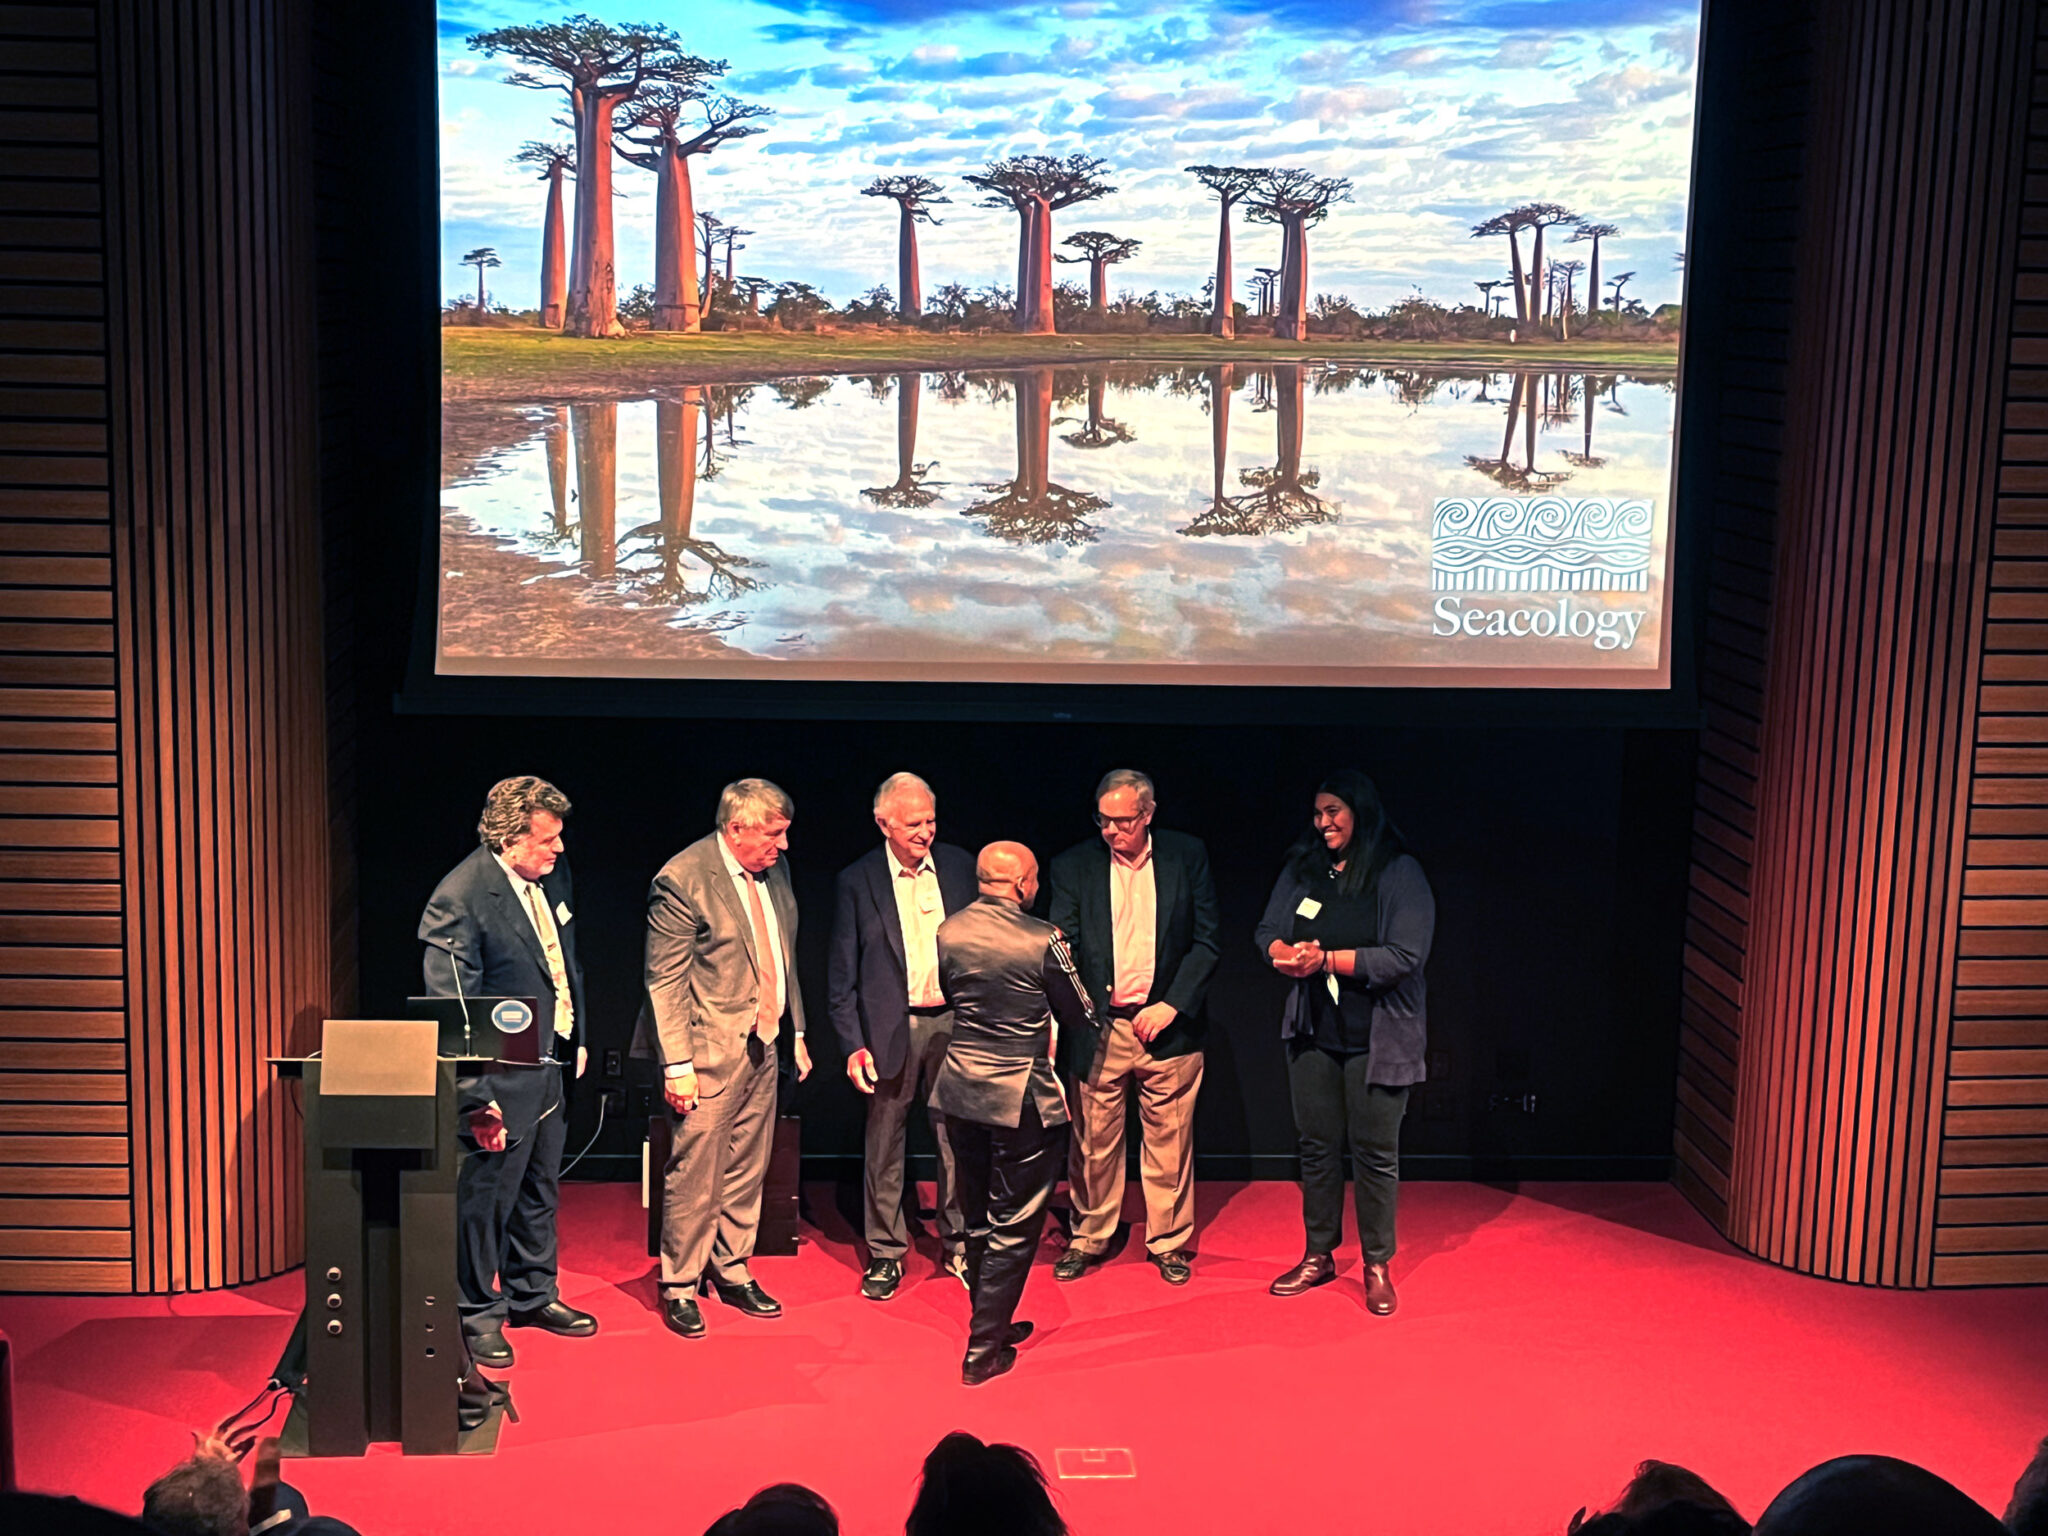 Members of our board of directors present the Seacology Prize to Dr. Jonah Ratsimbazafy.